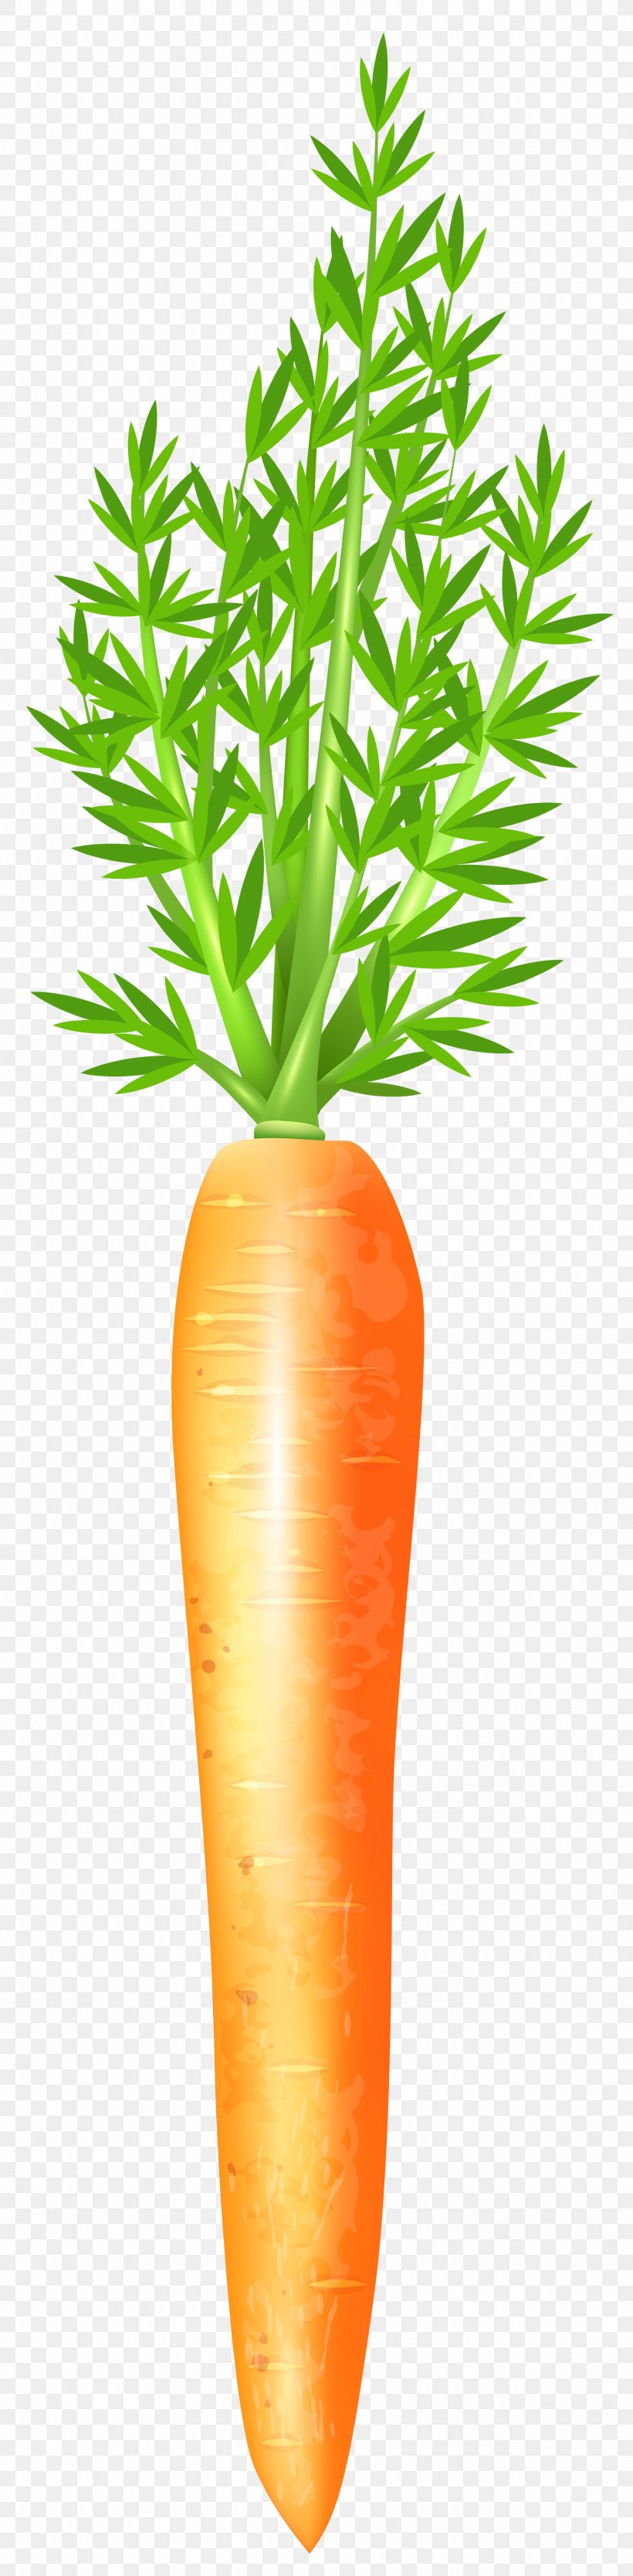 Carrot Clip Art, PNG, 1966x8000px, Juice, Art, Baby Carrot, Biscuits, Carrot Download Free